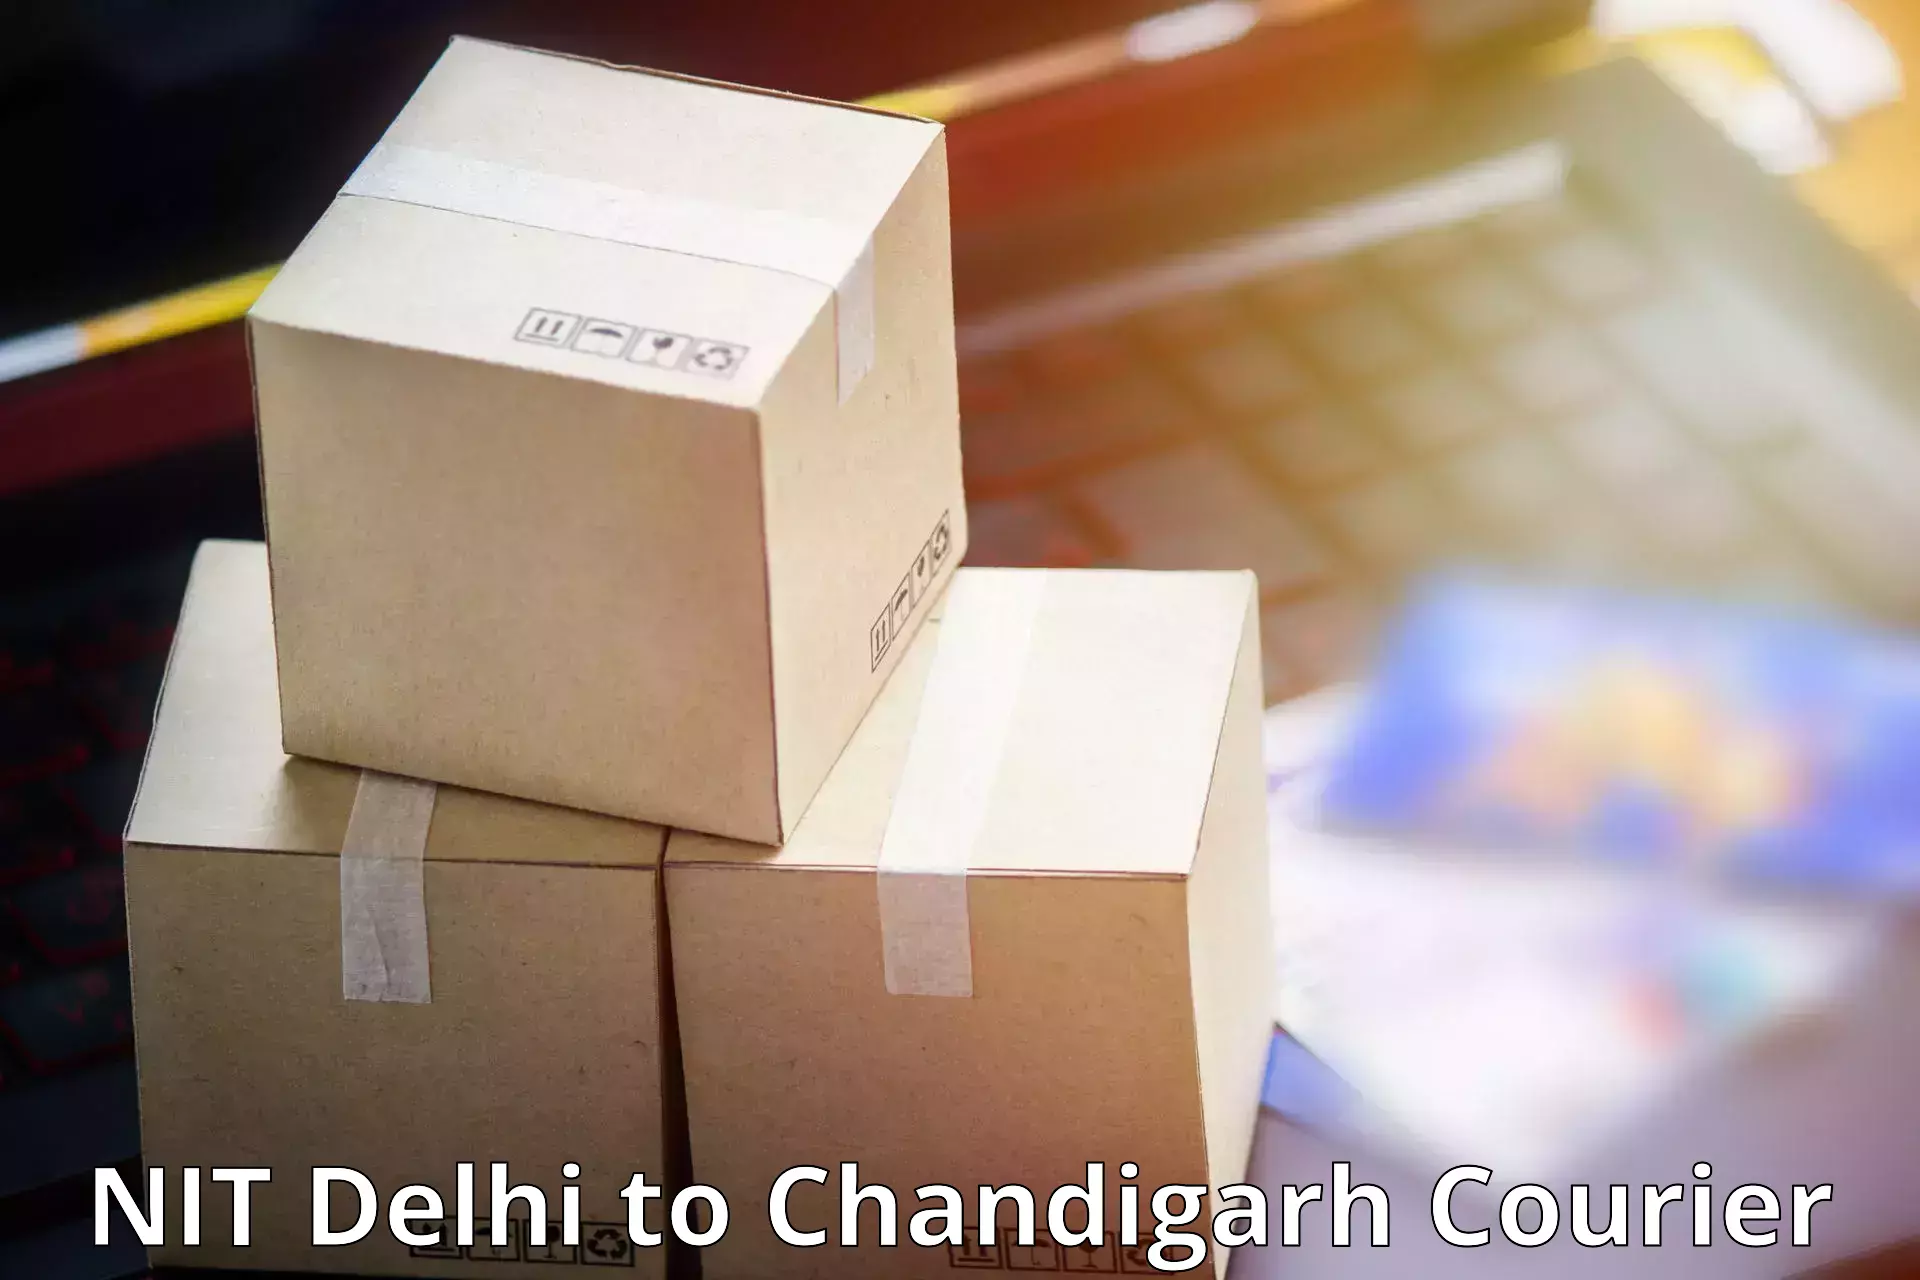 Professional courier services NIT Delhi to Chandigarh